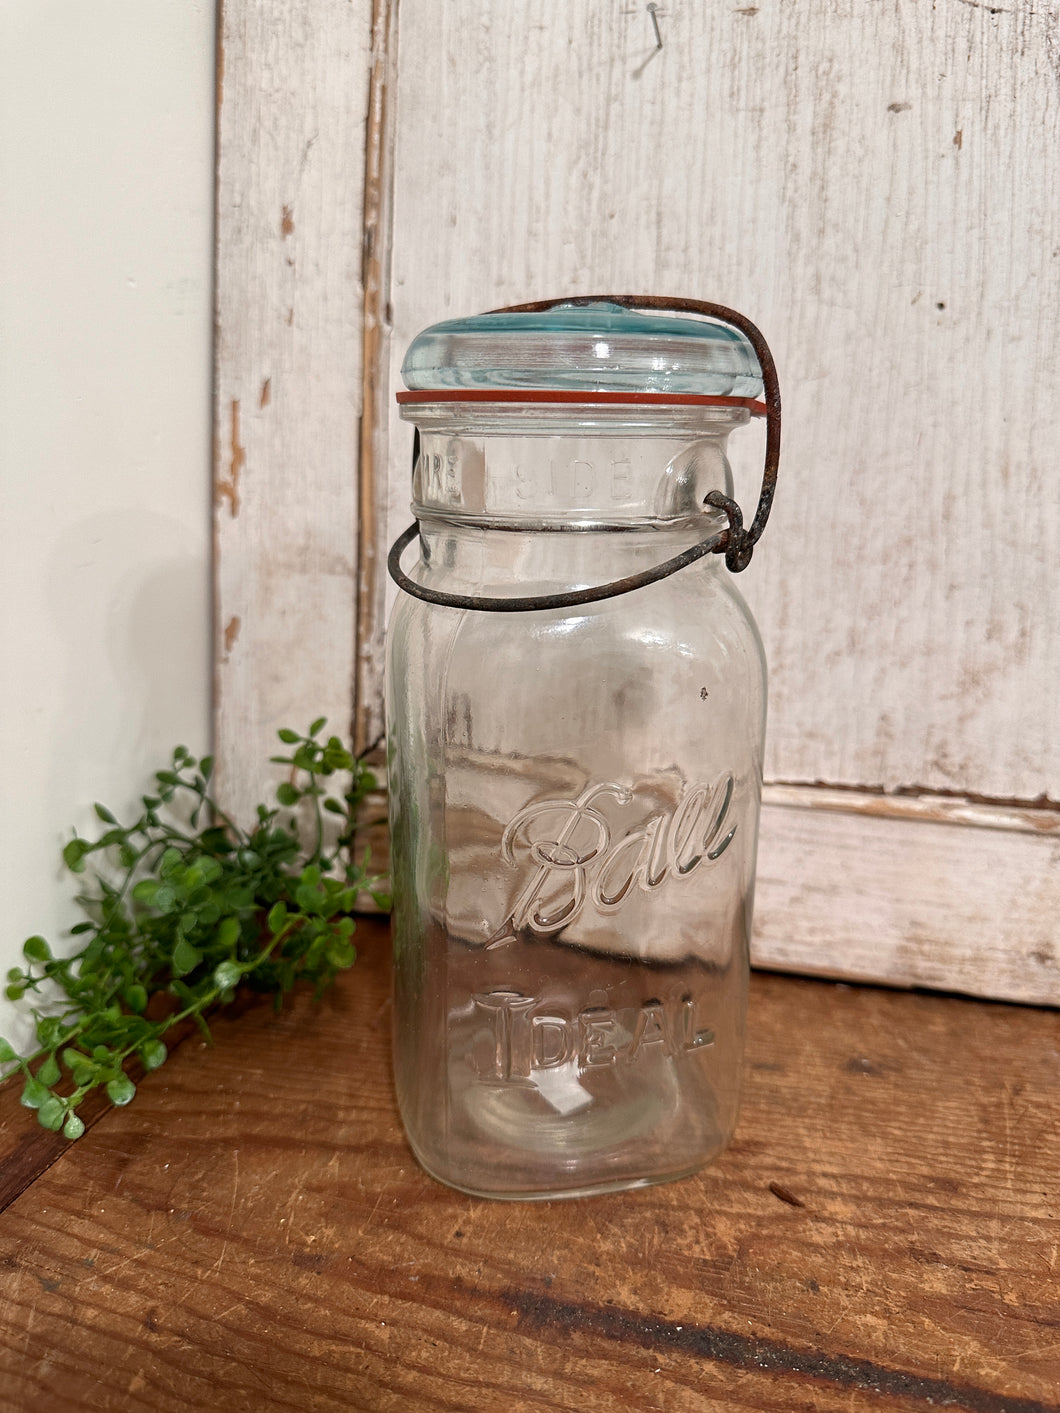 Ball Ideal Jar with Teal Lid